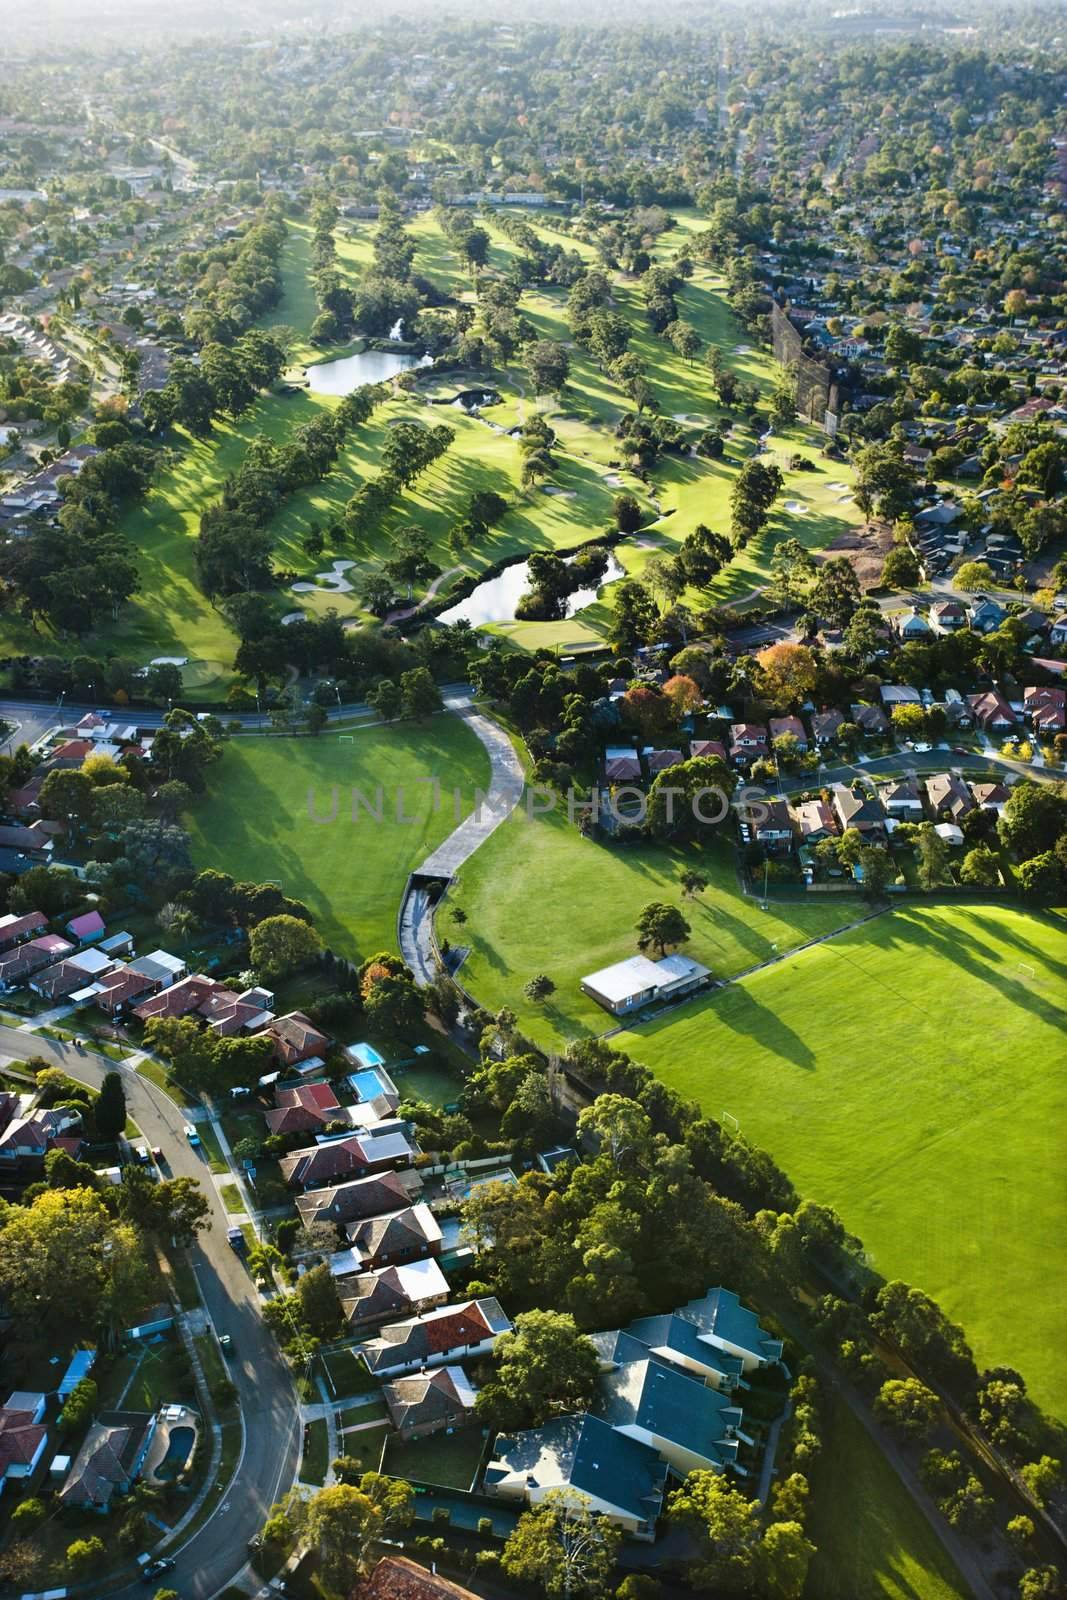 Aerial view of Ryde Parramatta Golf Course and buildings in West Ryde, Australia.